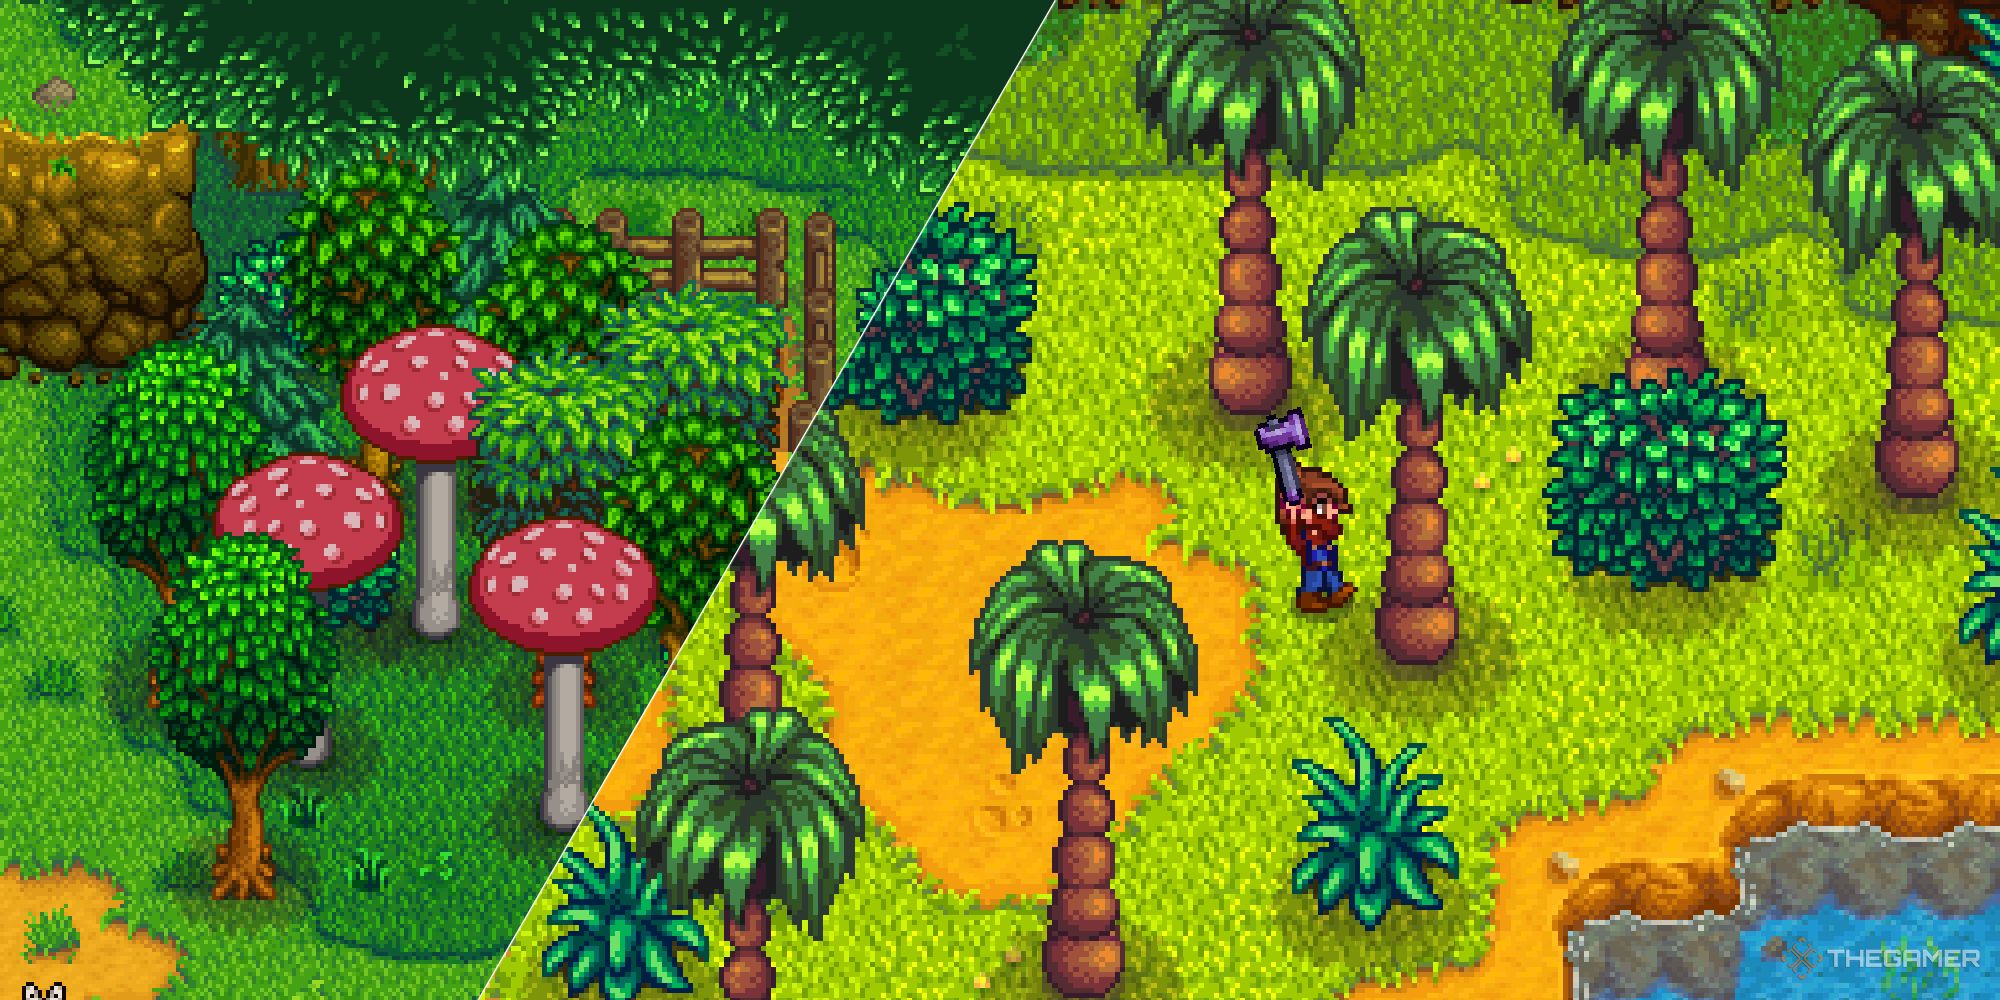 A split image of forested areas and Ginger Island in Stardew Valley